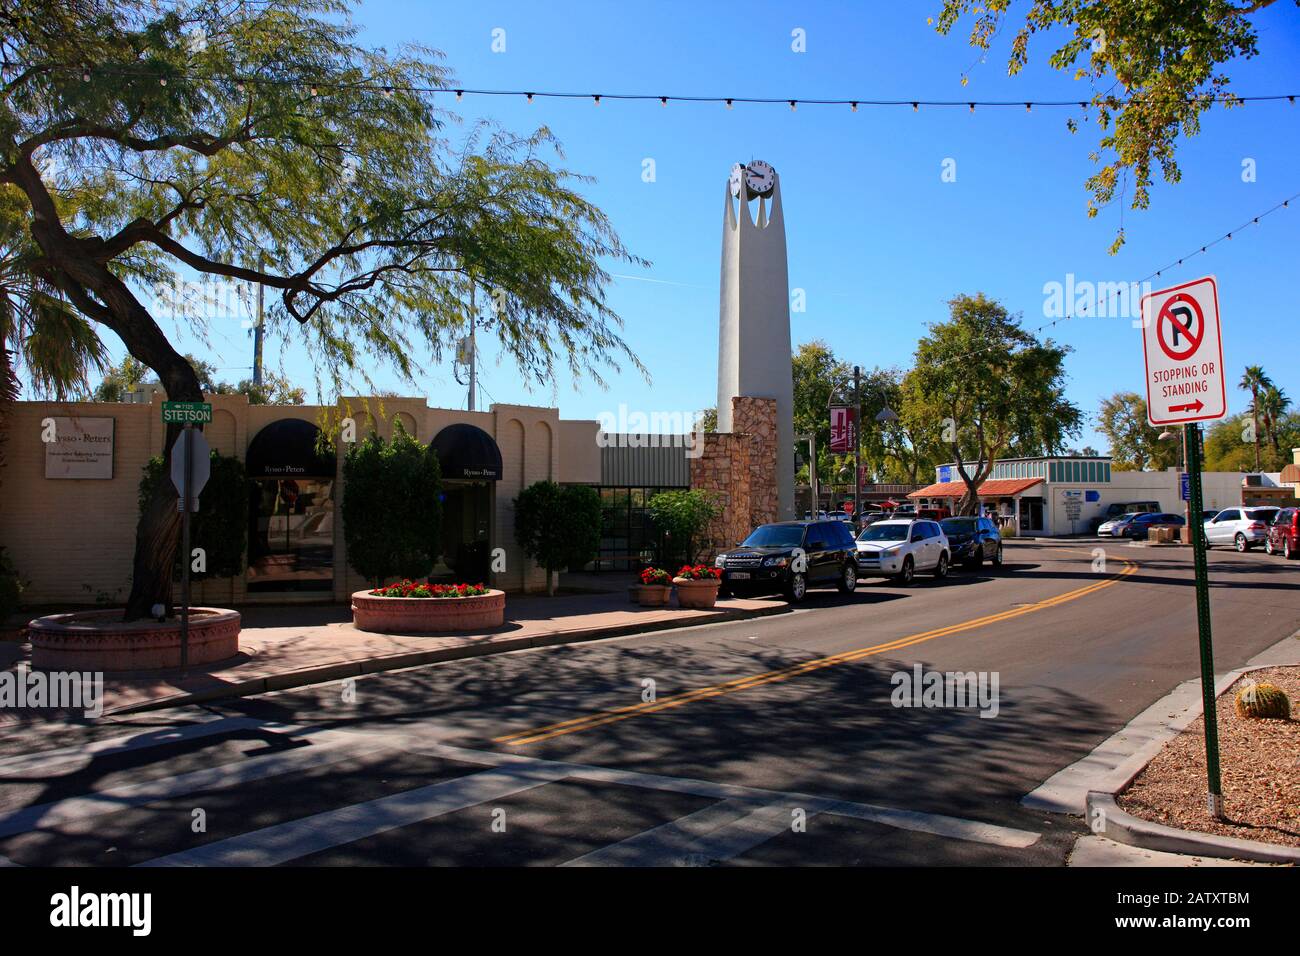 The clock tower in the 5th Ave shopping district of Old Town Scottsdale AZ Stock Photo